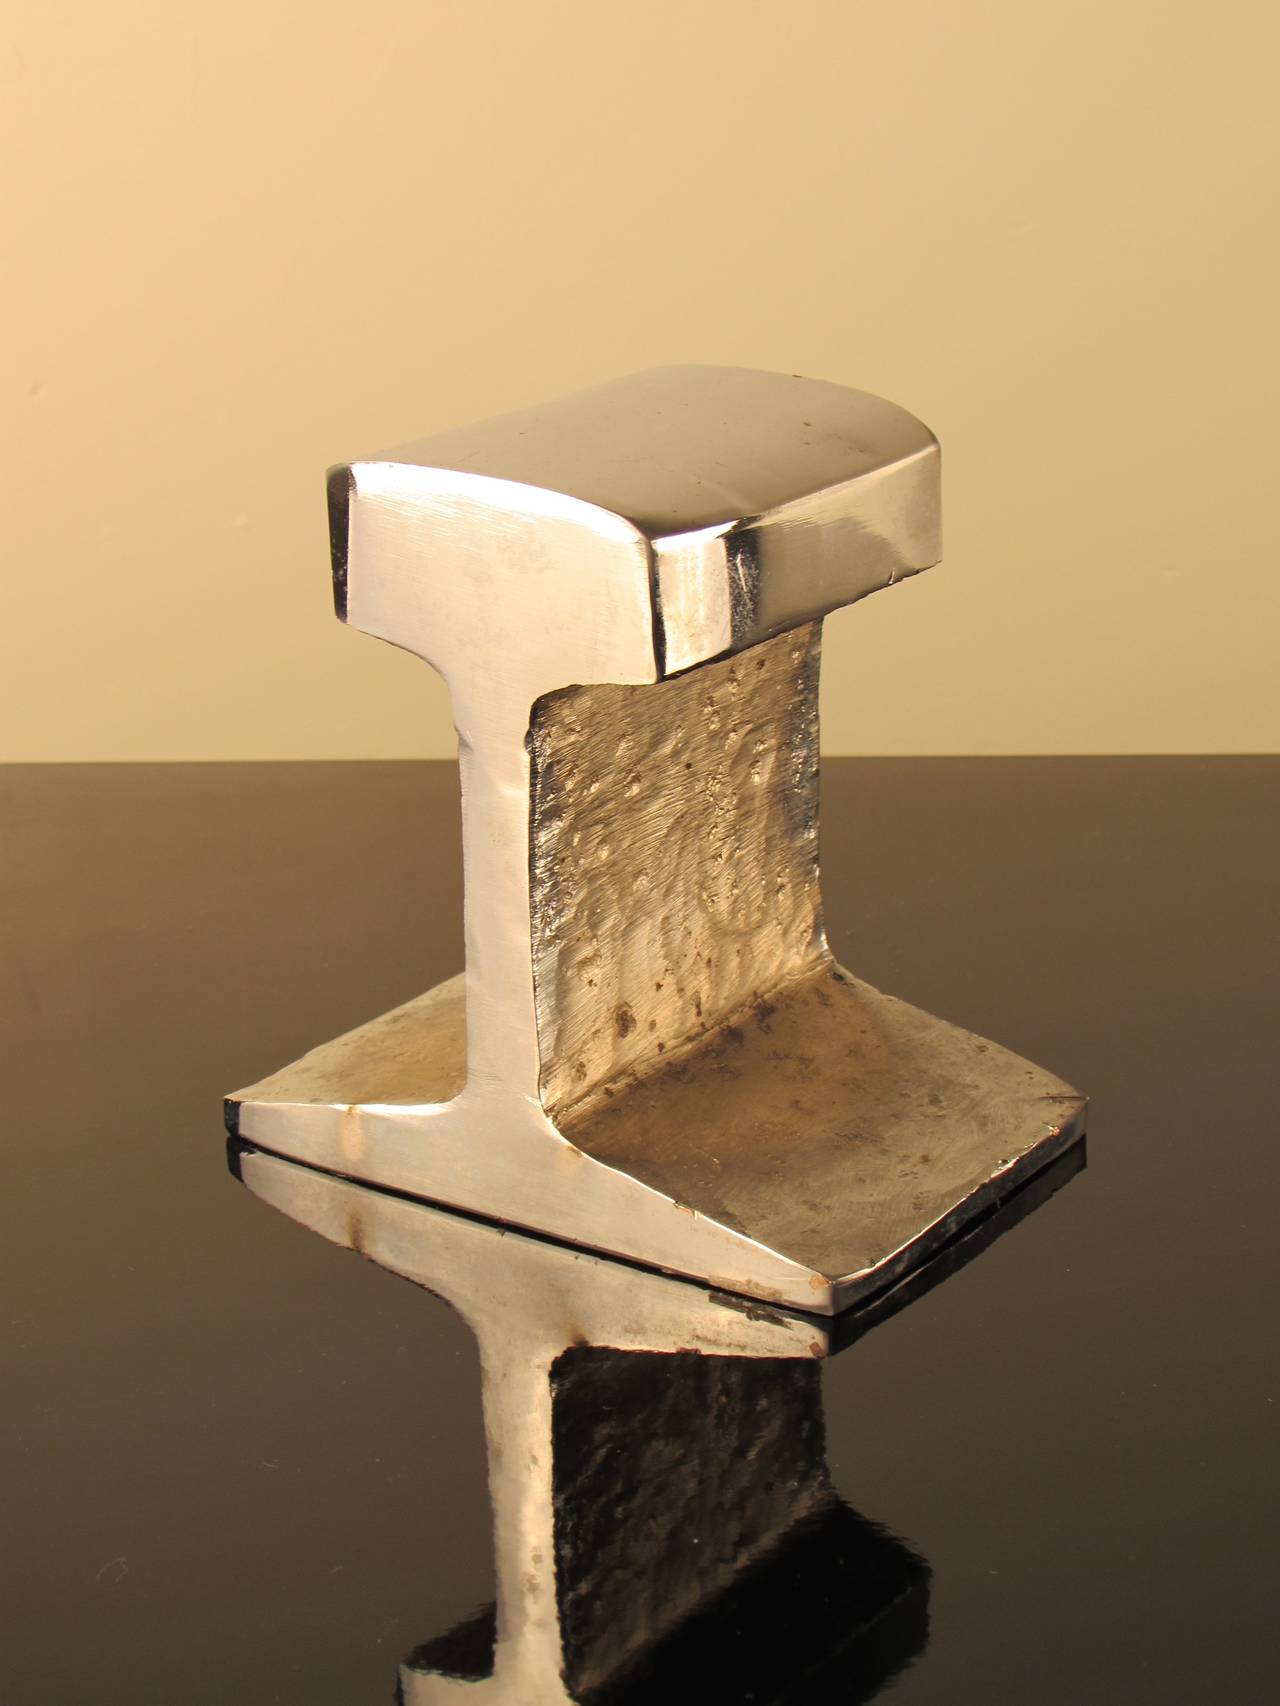 Industrial meets glam! Cast metal railroad tie bookends plated in nickel for a sparkly chrome finish! Wonderful quality.

Excellent condition with minor wear consistent with age and use.